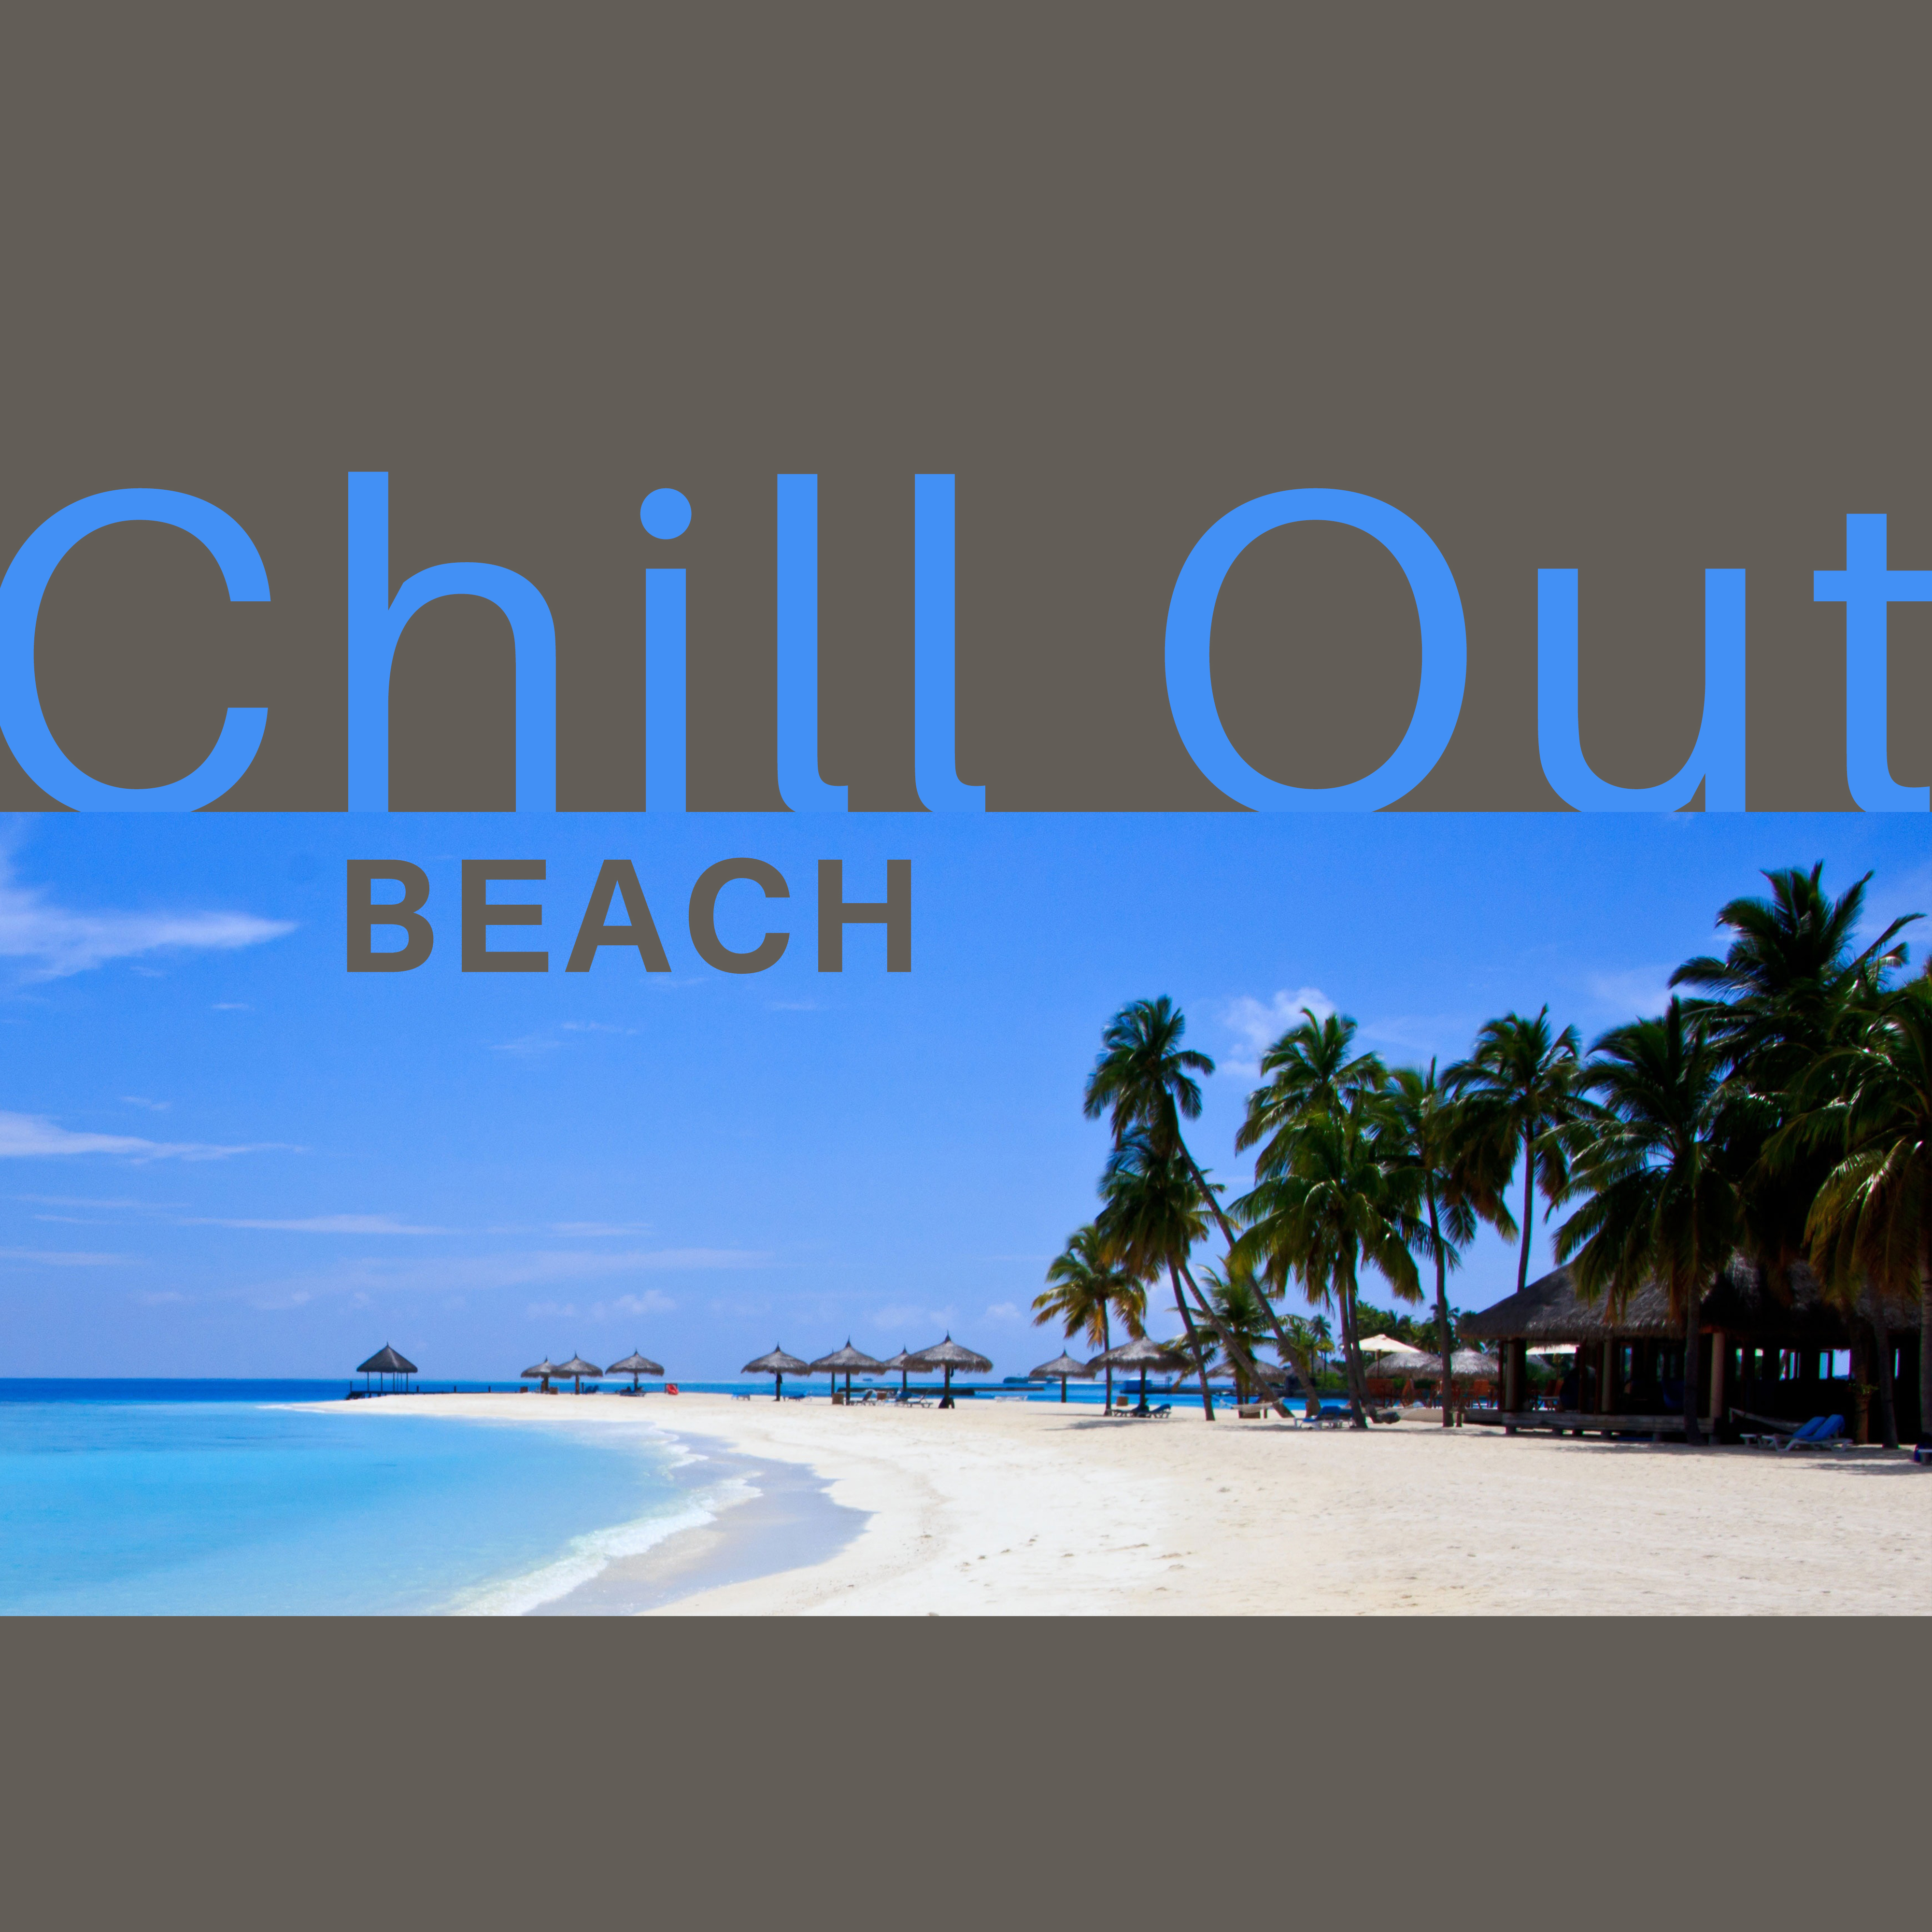 Chill Out Beach – Ibiza Chill Out, Party Hits 2017, Summer Music, Holiday Time, Hot Vibes